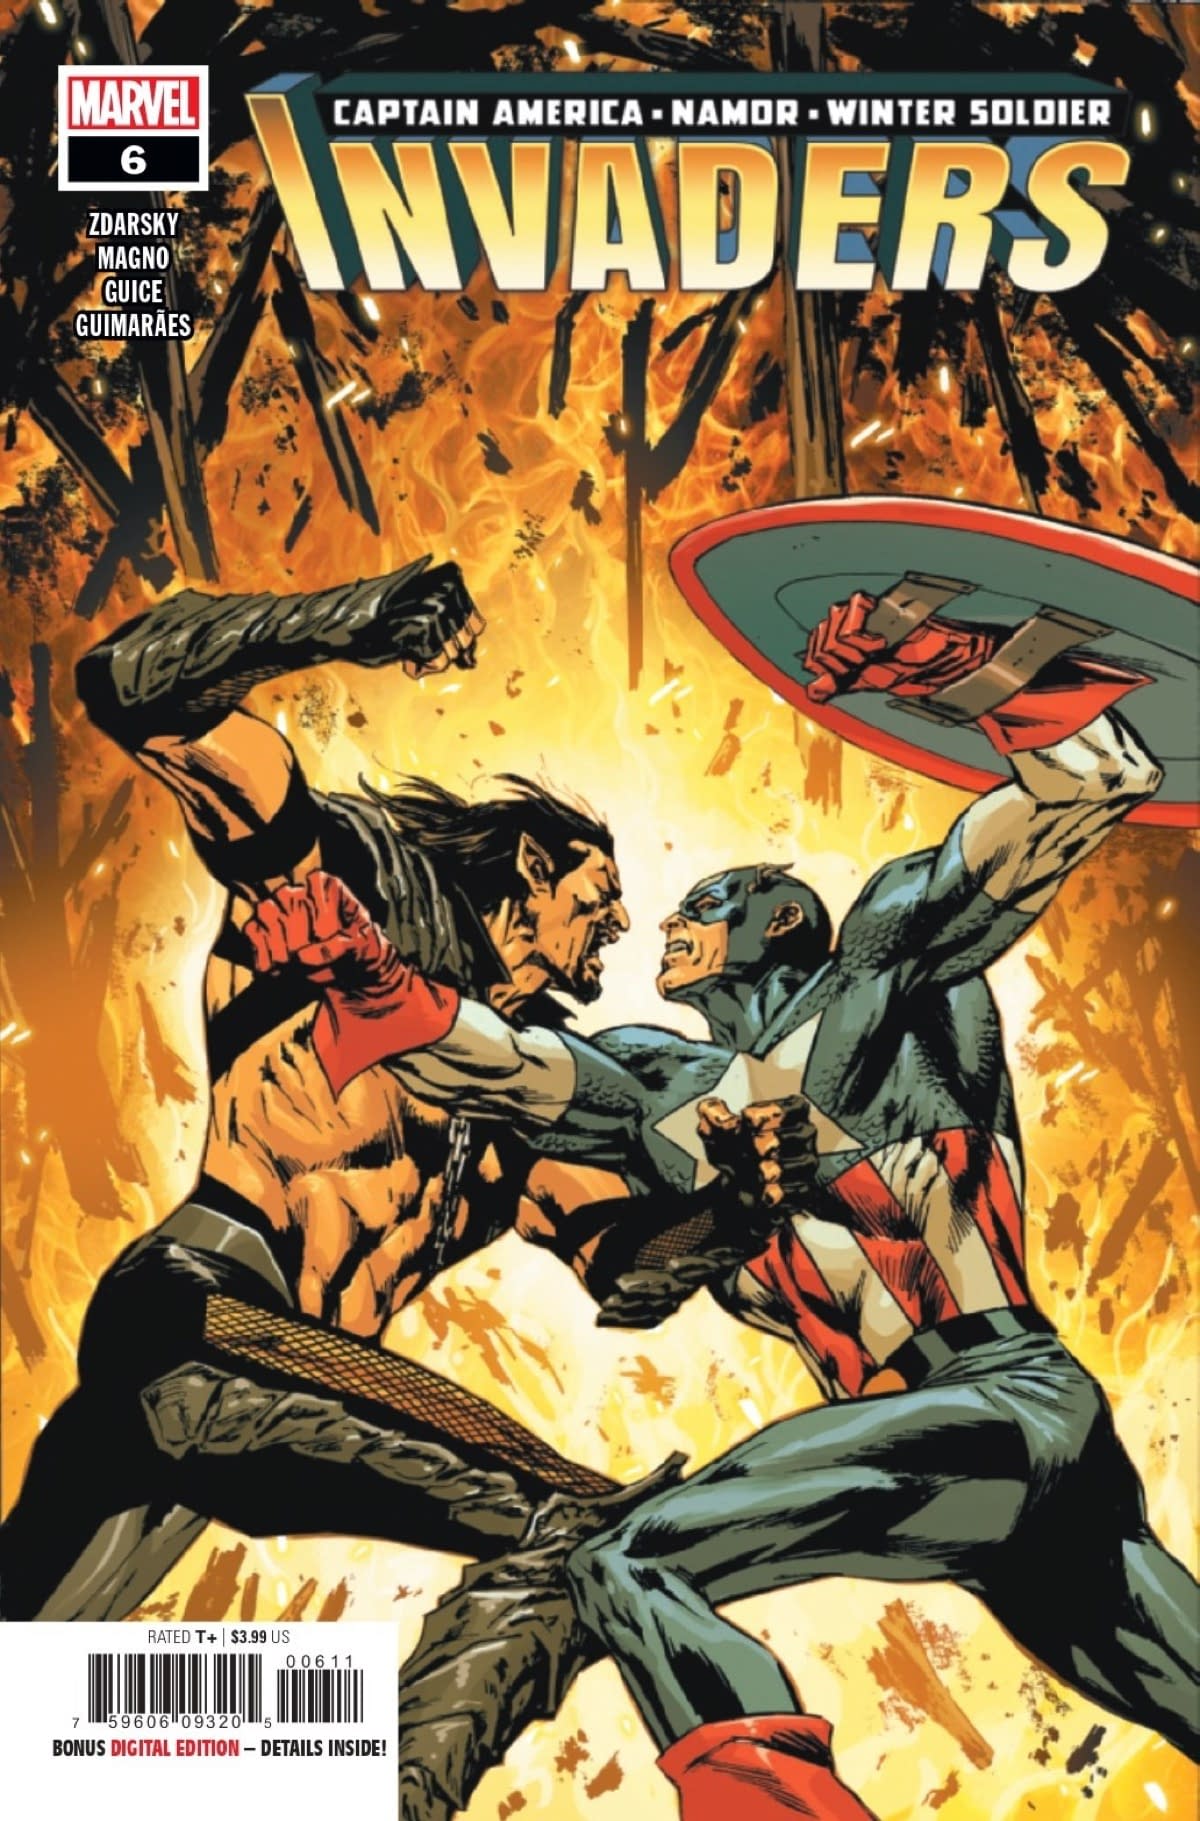 Invaders #6 Preview